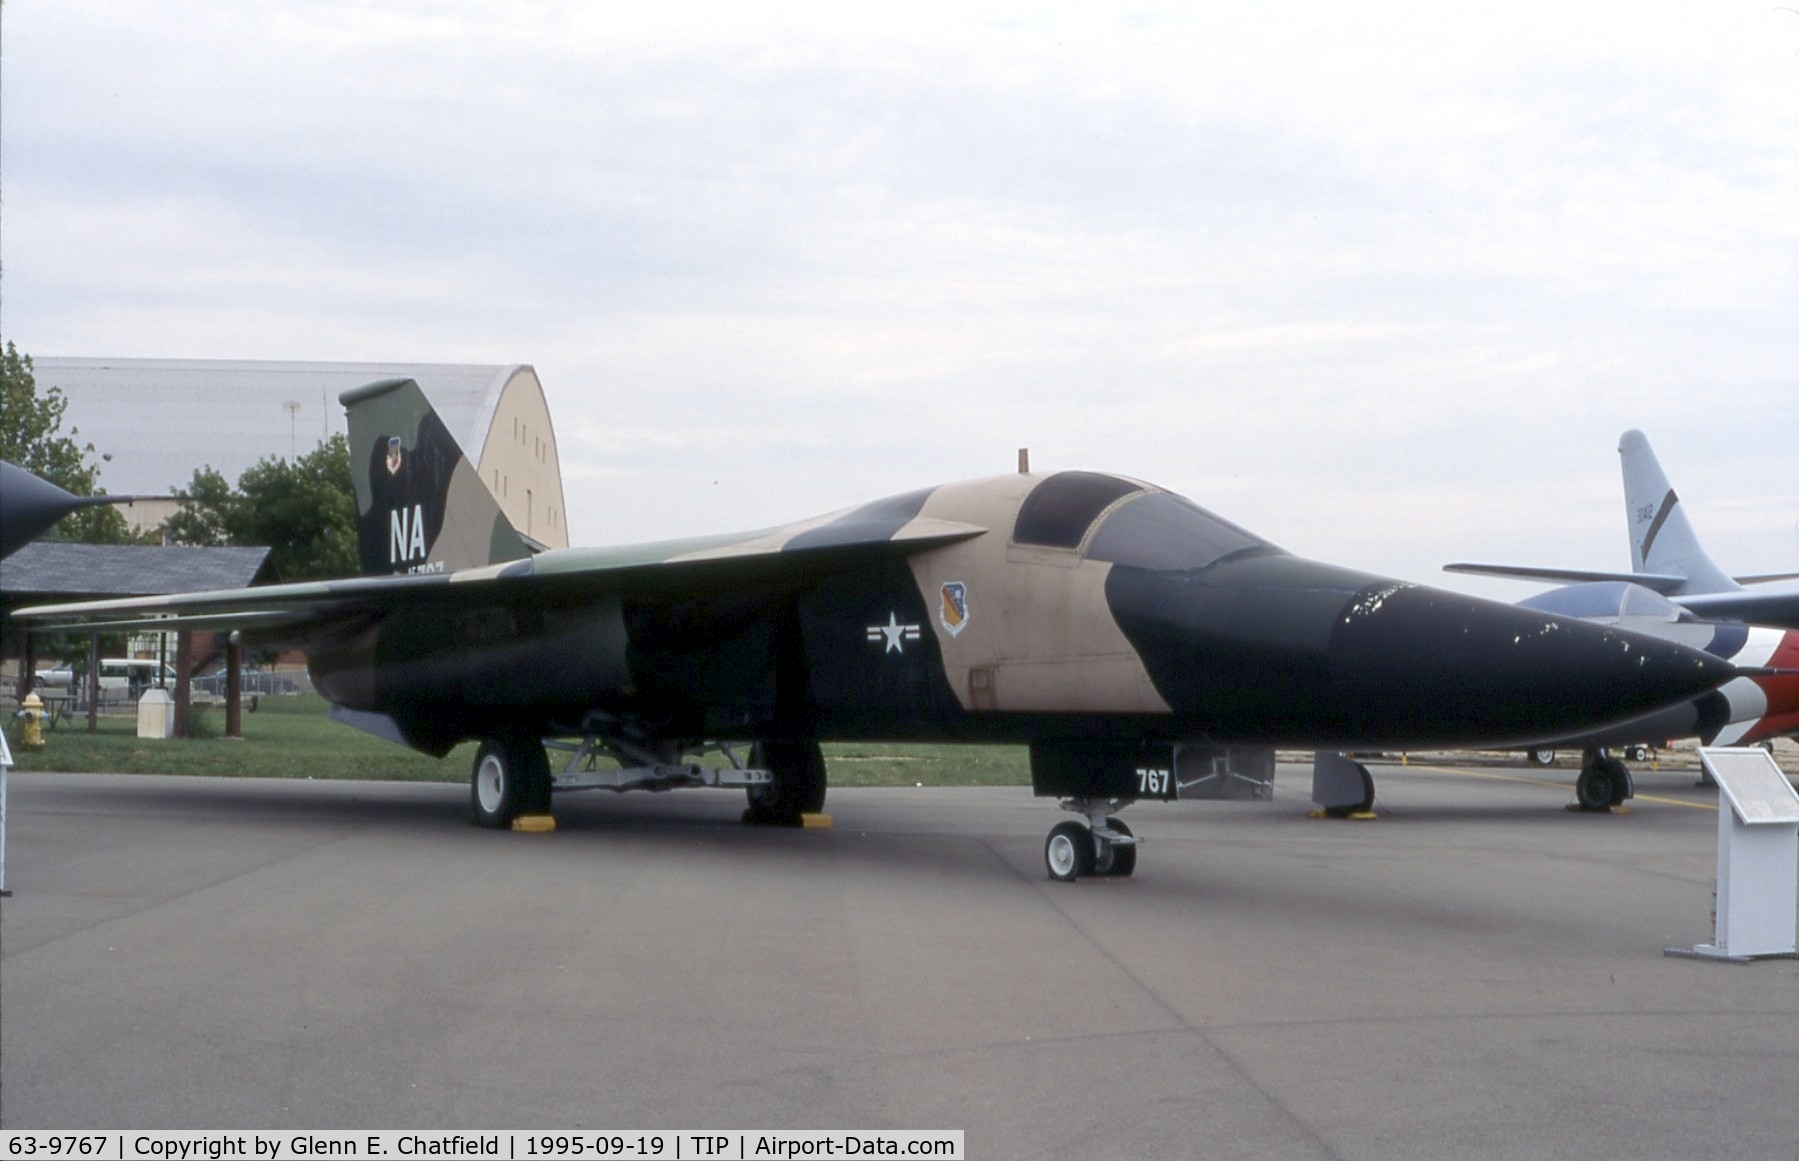 63-9767, 1965 General Dynamics F-111A Aardvark C/N A1-02, F-111A at the Octave Chanute Aviation Center